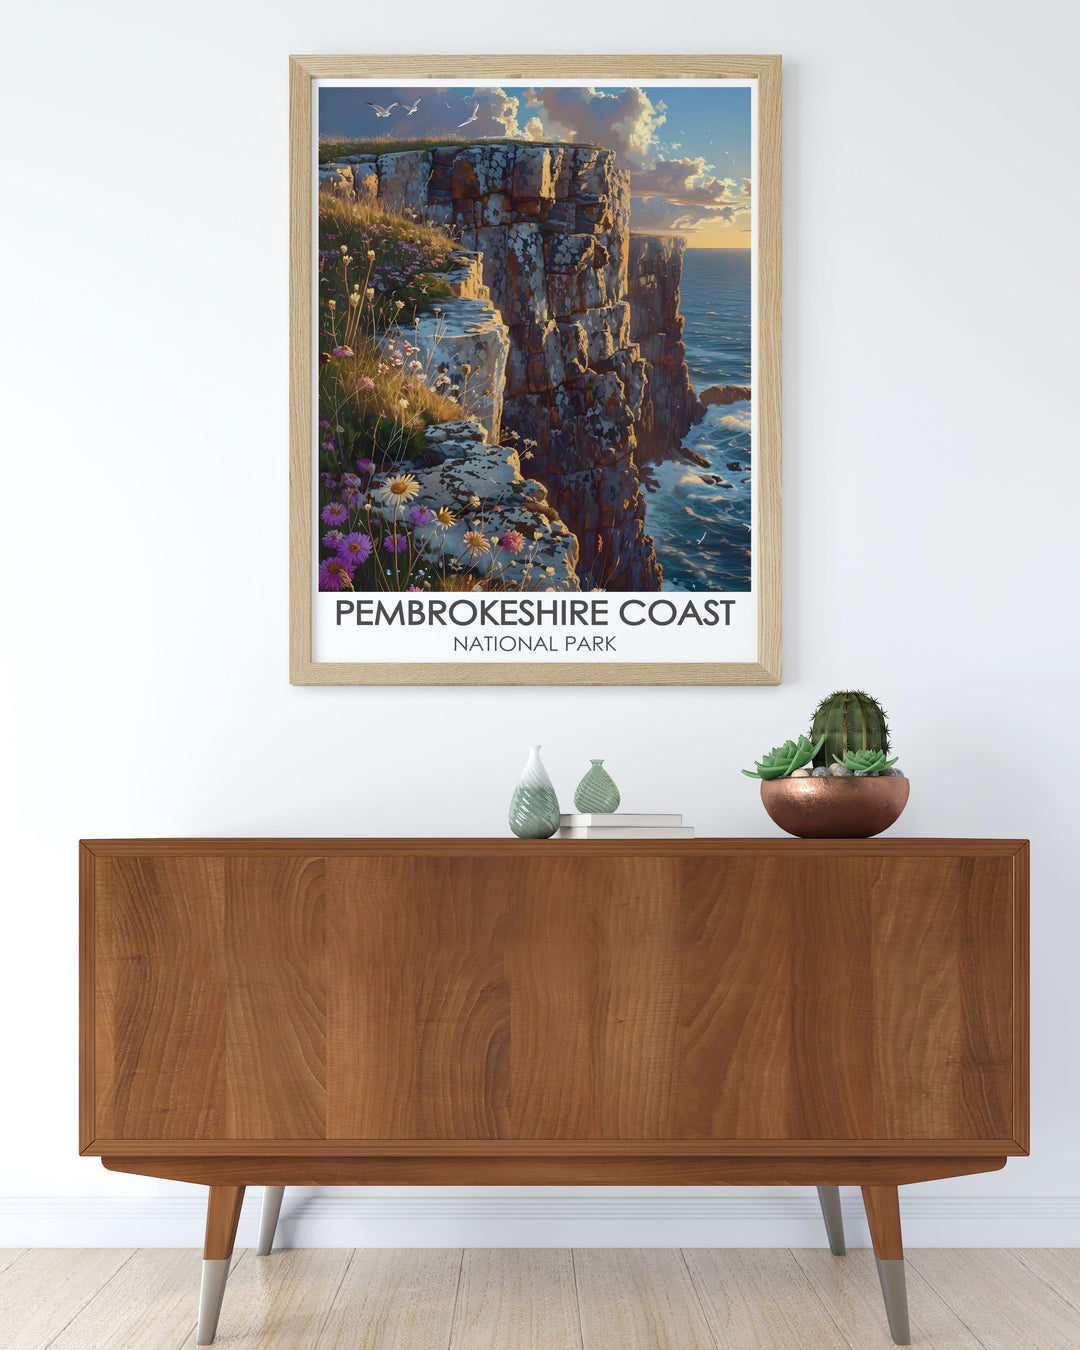 Pembrokeshire Coast travel poster featuring St. Davids Head in a vintage style capturing the essence of this iconic location with dramatic cliffs and breathtaking views ideal for lovers of nature and vintage travel prints.